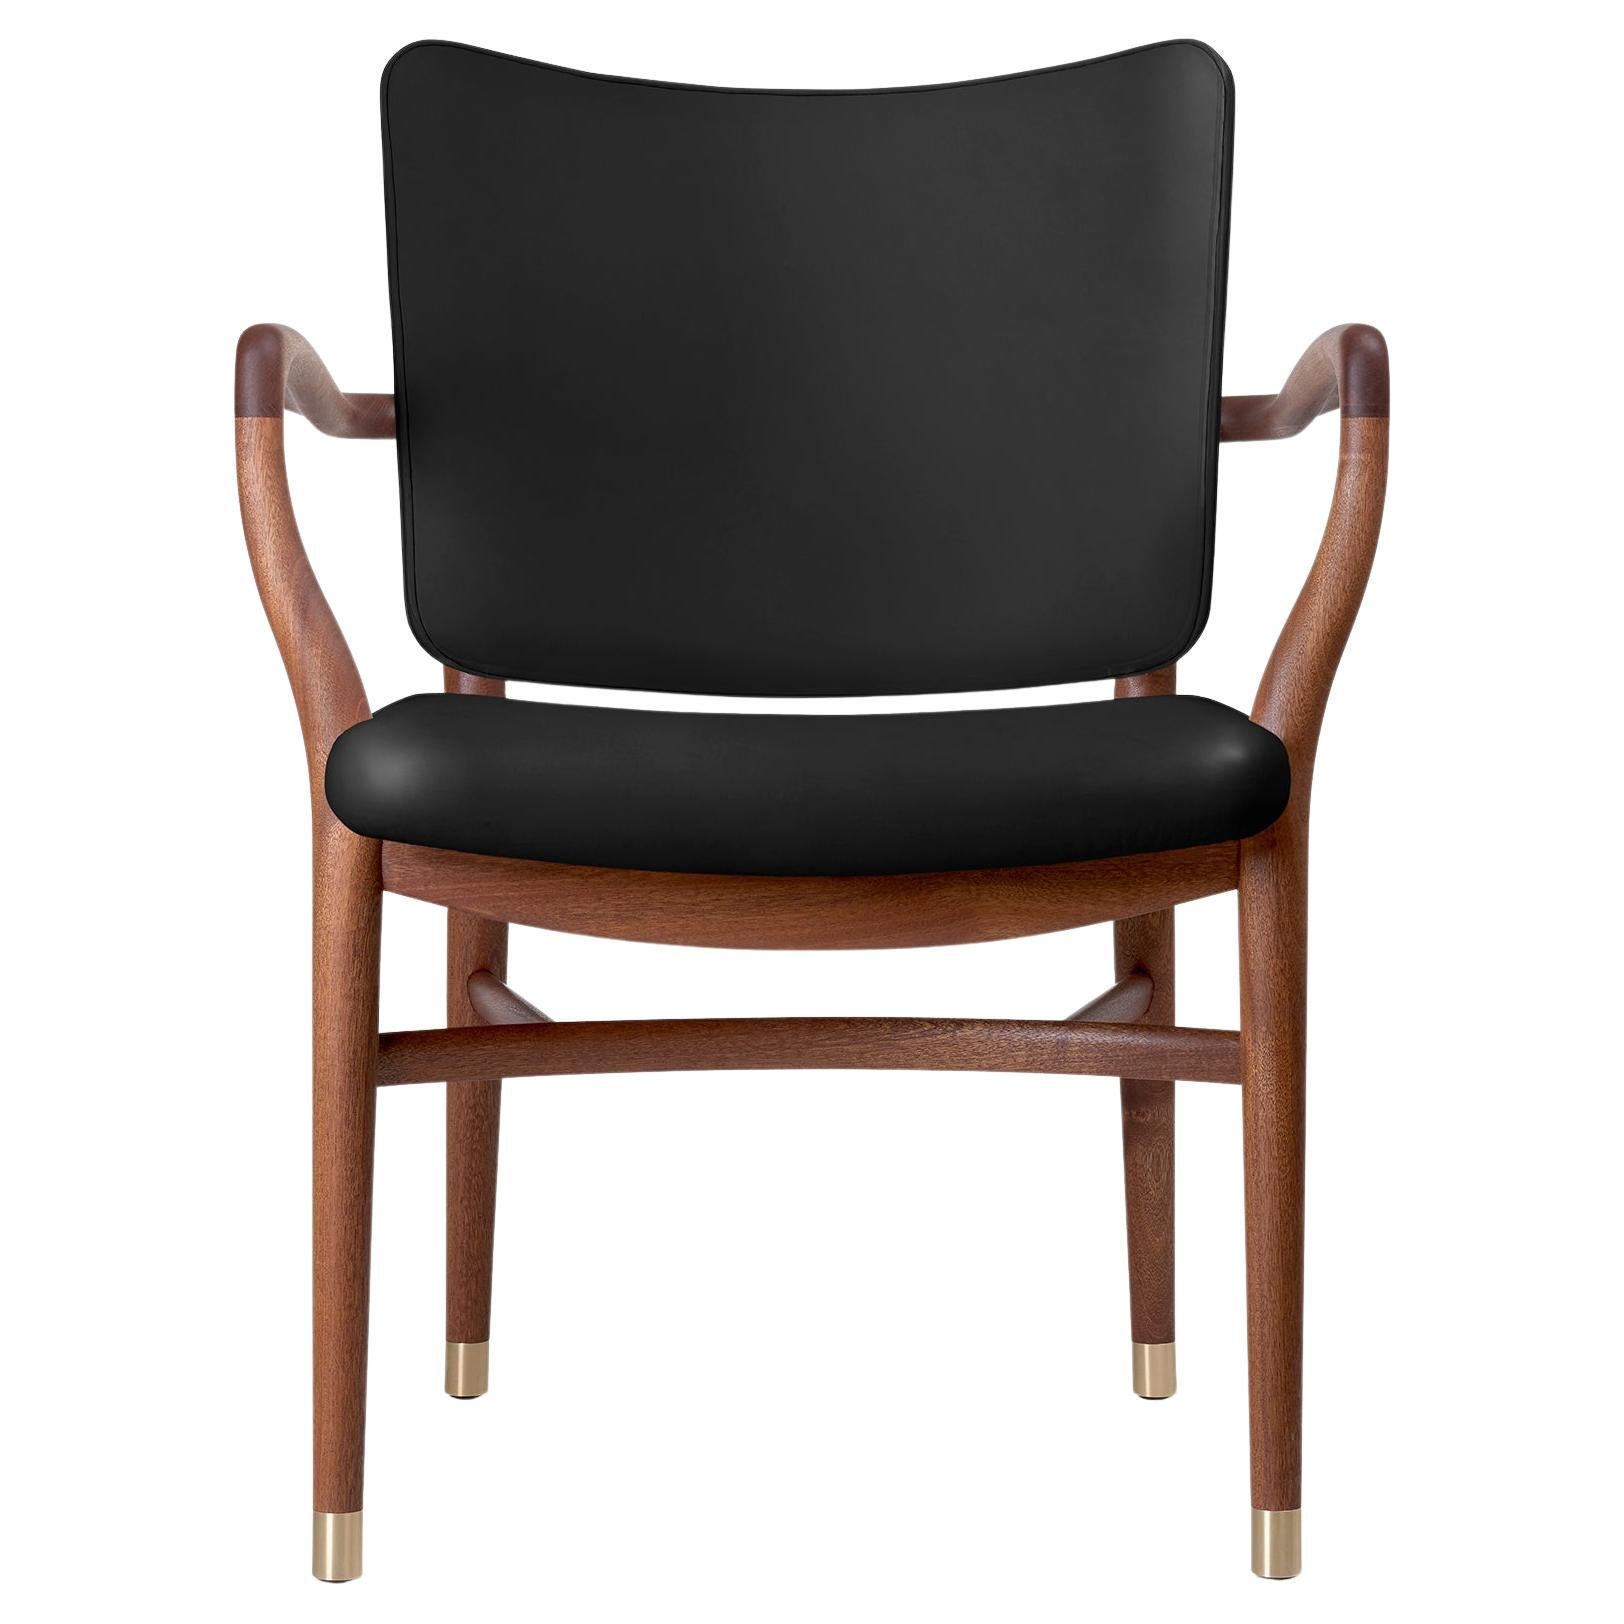 Vilhelm Lauritzen 'VLA61' Chair in Mahogany and Leather for Carl Hansen & Son For Sale